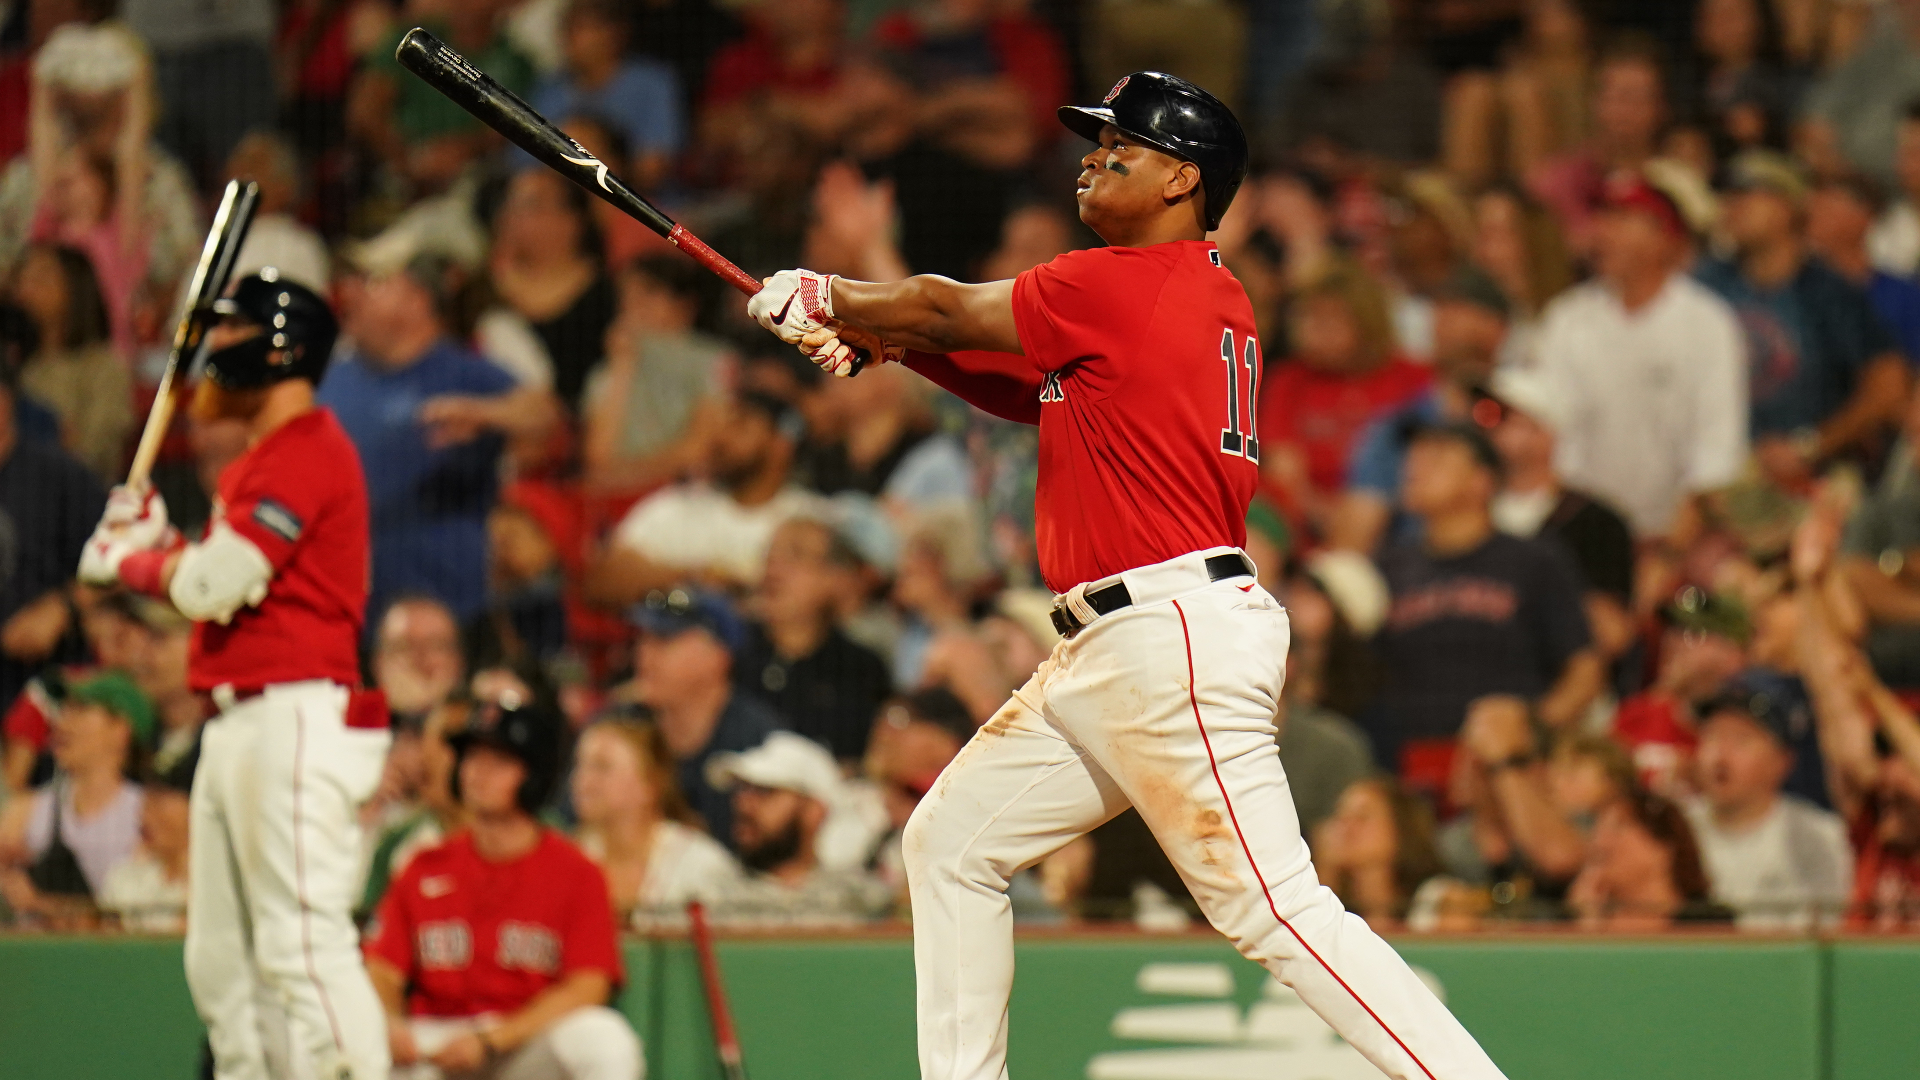 Red Sox Vs. Rays Lineups: Boston Aims To Take First Game Of
Doubleheader